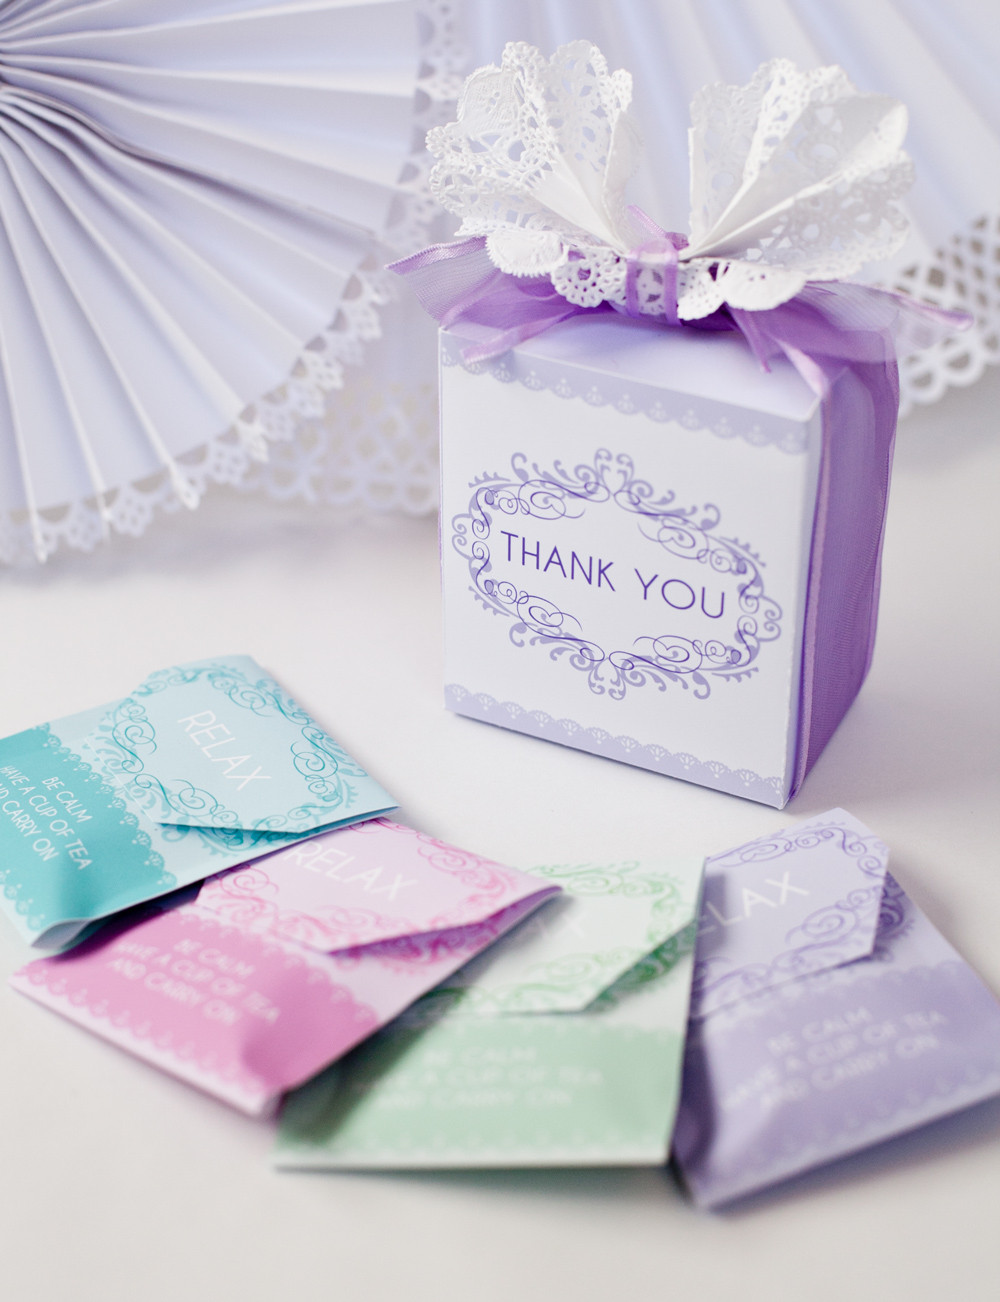 DIY Baby Shower Party Favors
 DIY Baby Shower Tea Party Favor Free Printable